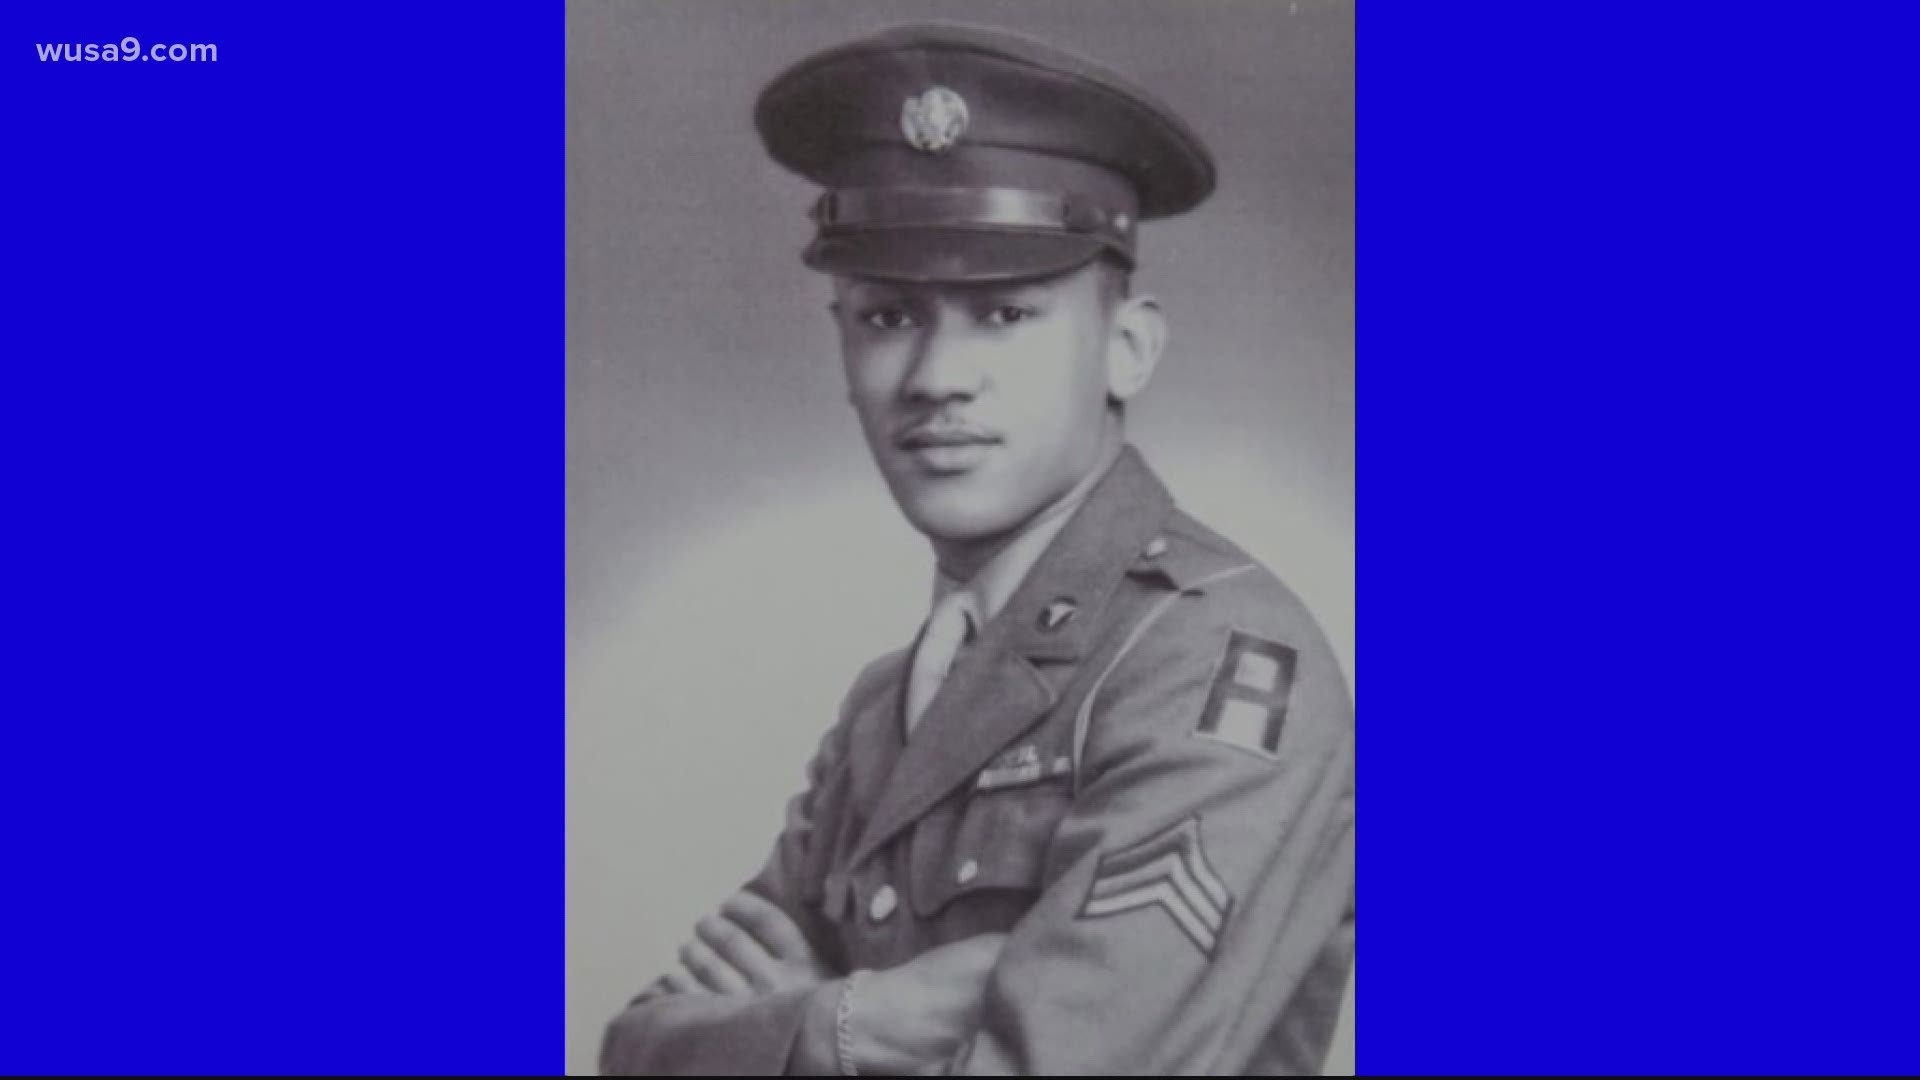 Lawmakers pushing for Black soldier to posthumously receive Medal of Honor for actions on D-Day